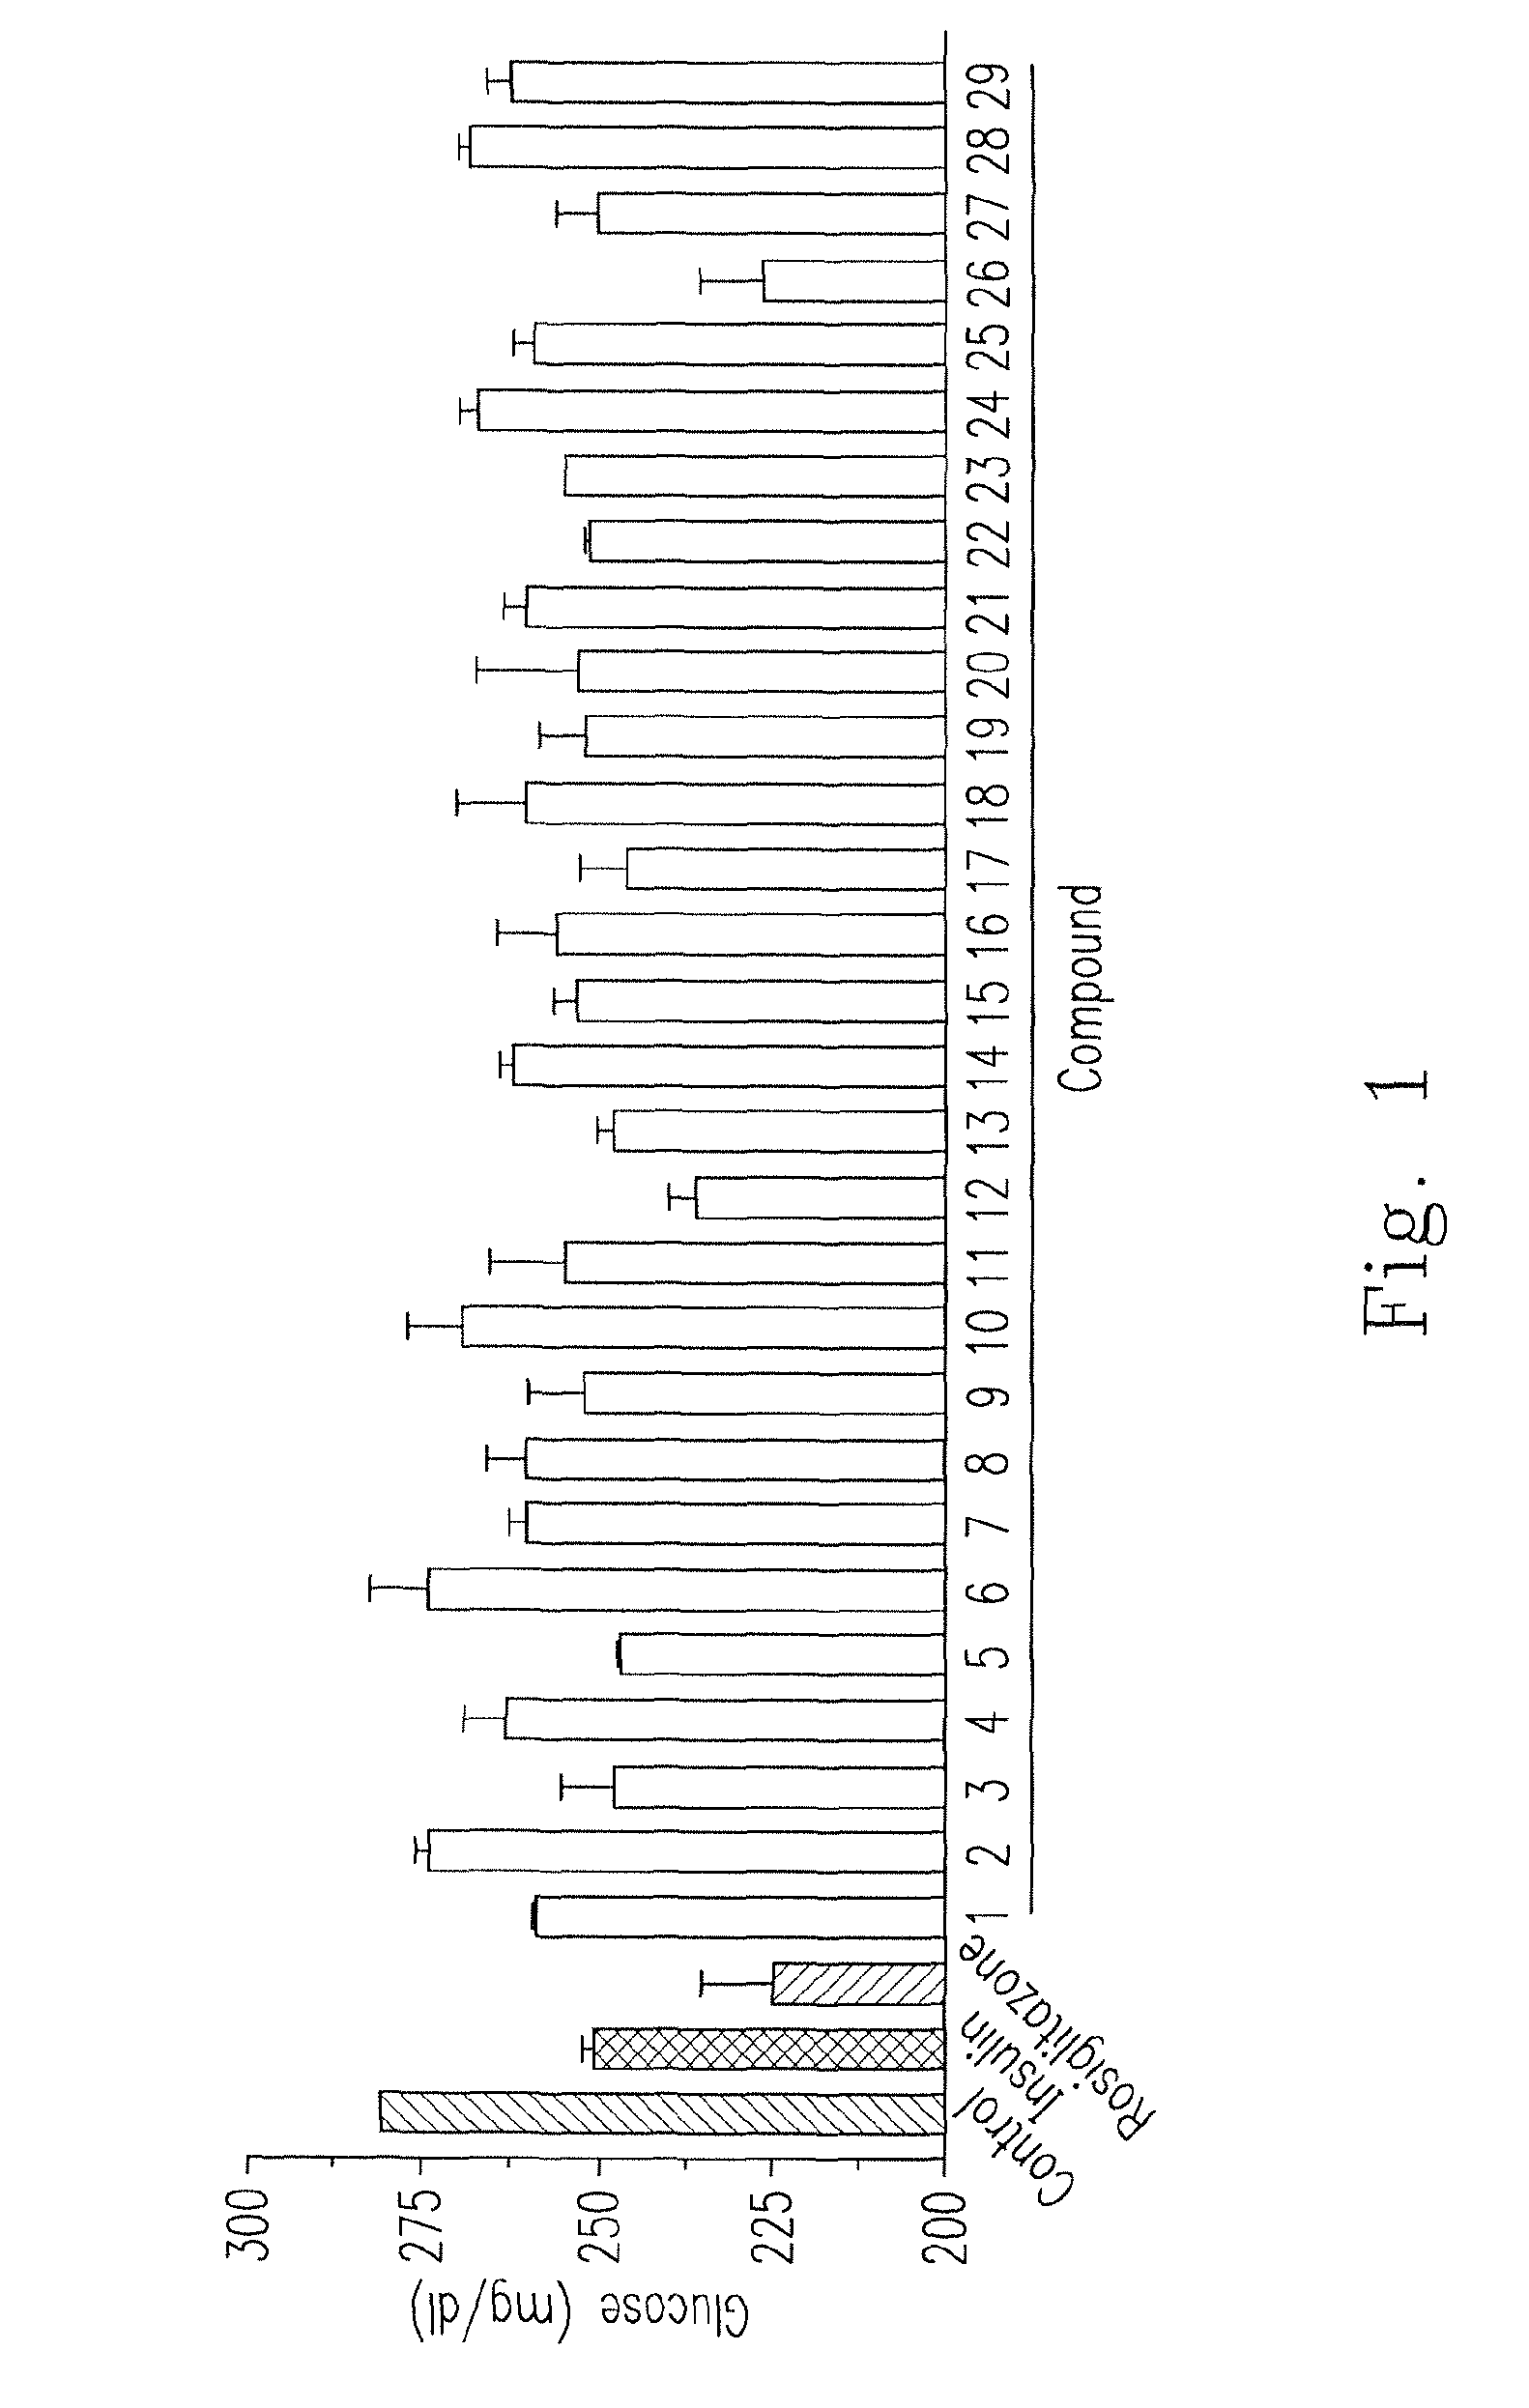 Composition for treating diabetes and metabolic diseases and a preparation method thereof